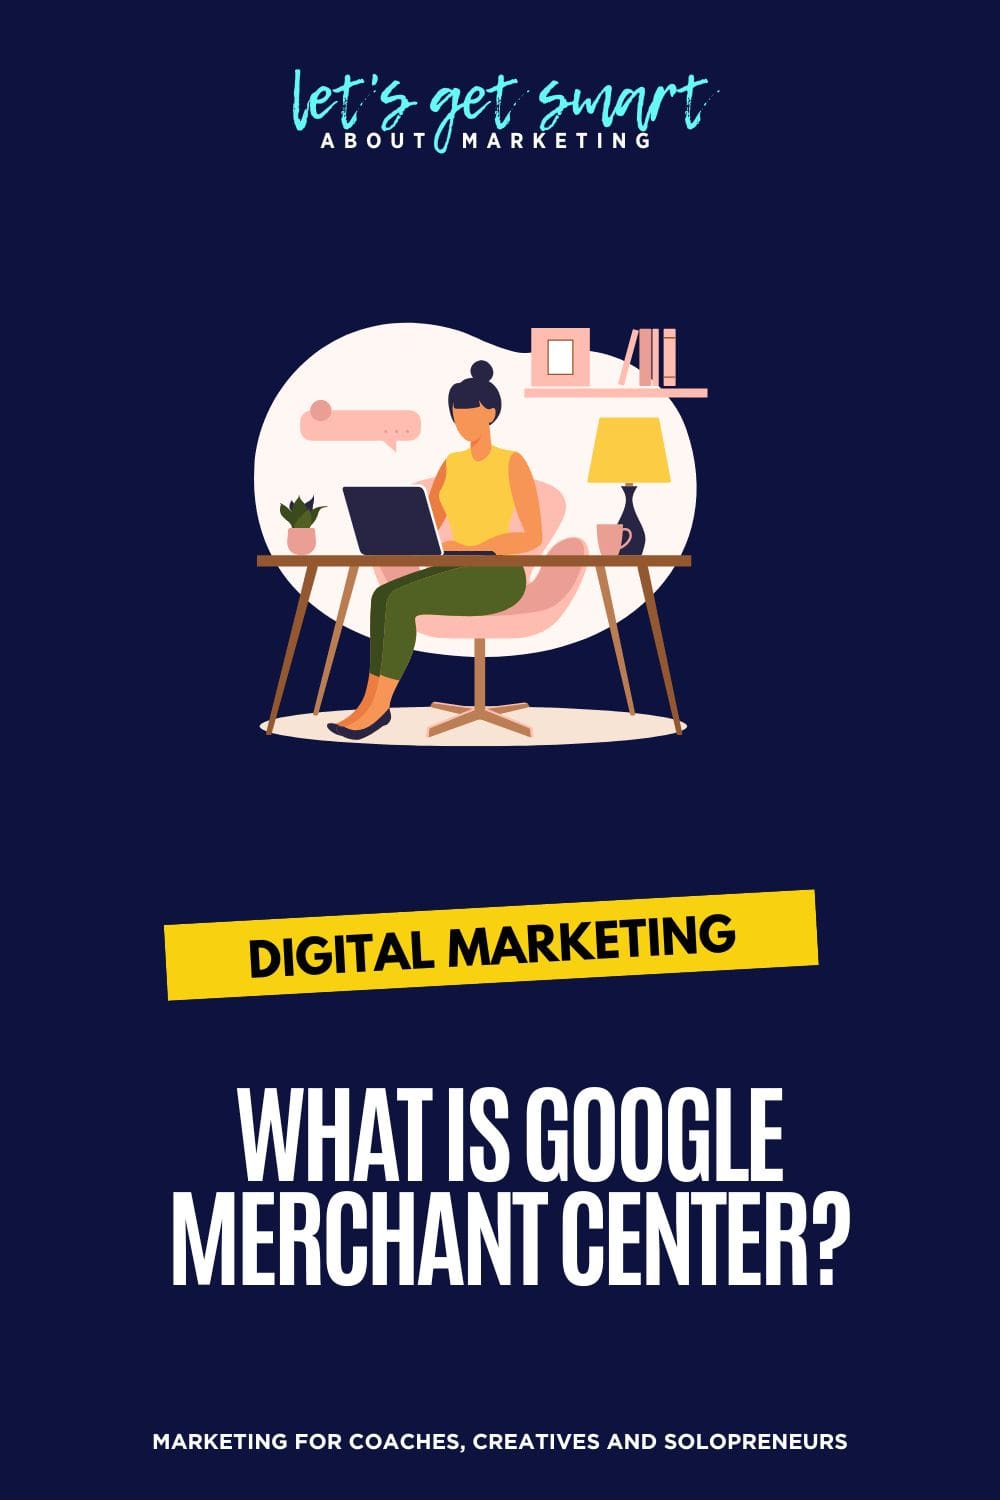 What Is Google Merchant Center?: How It Helps Your Business